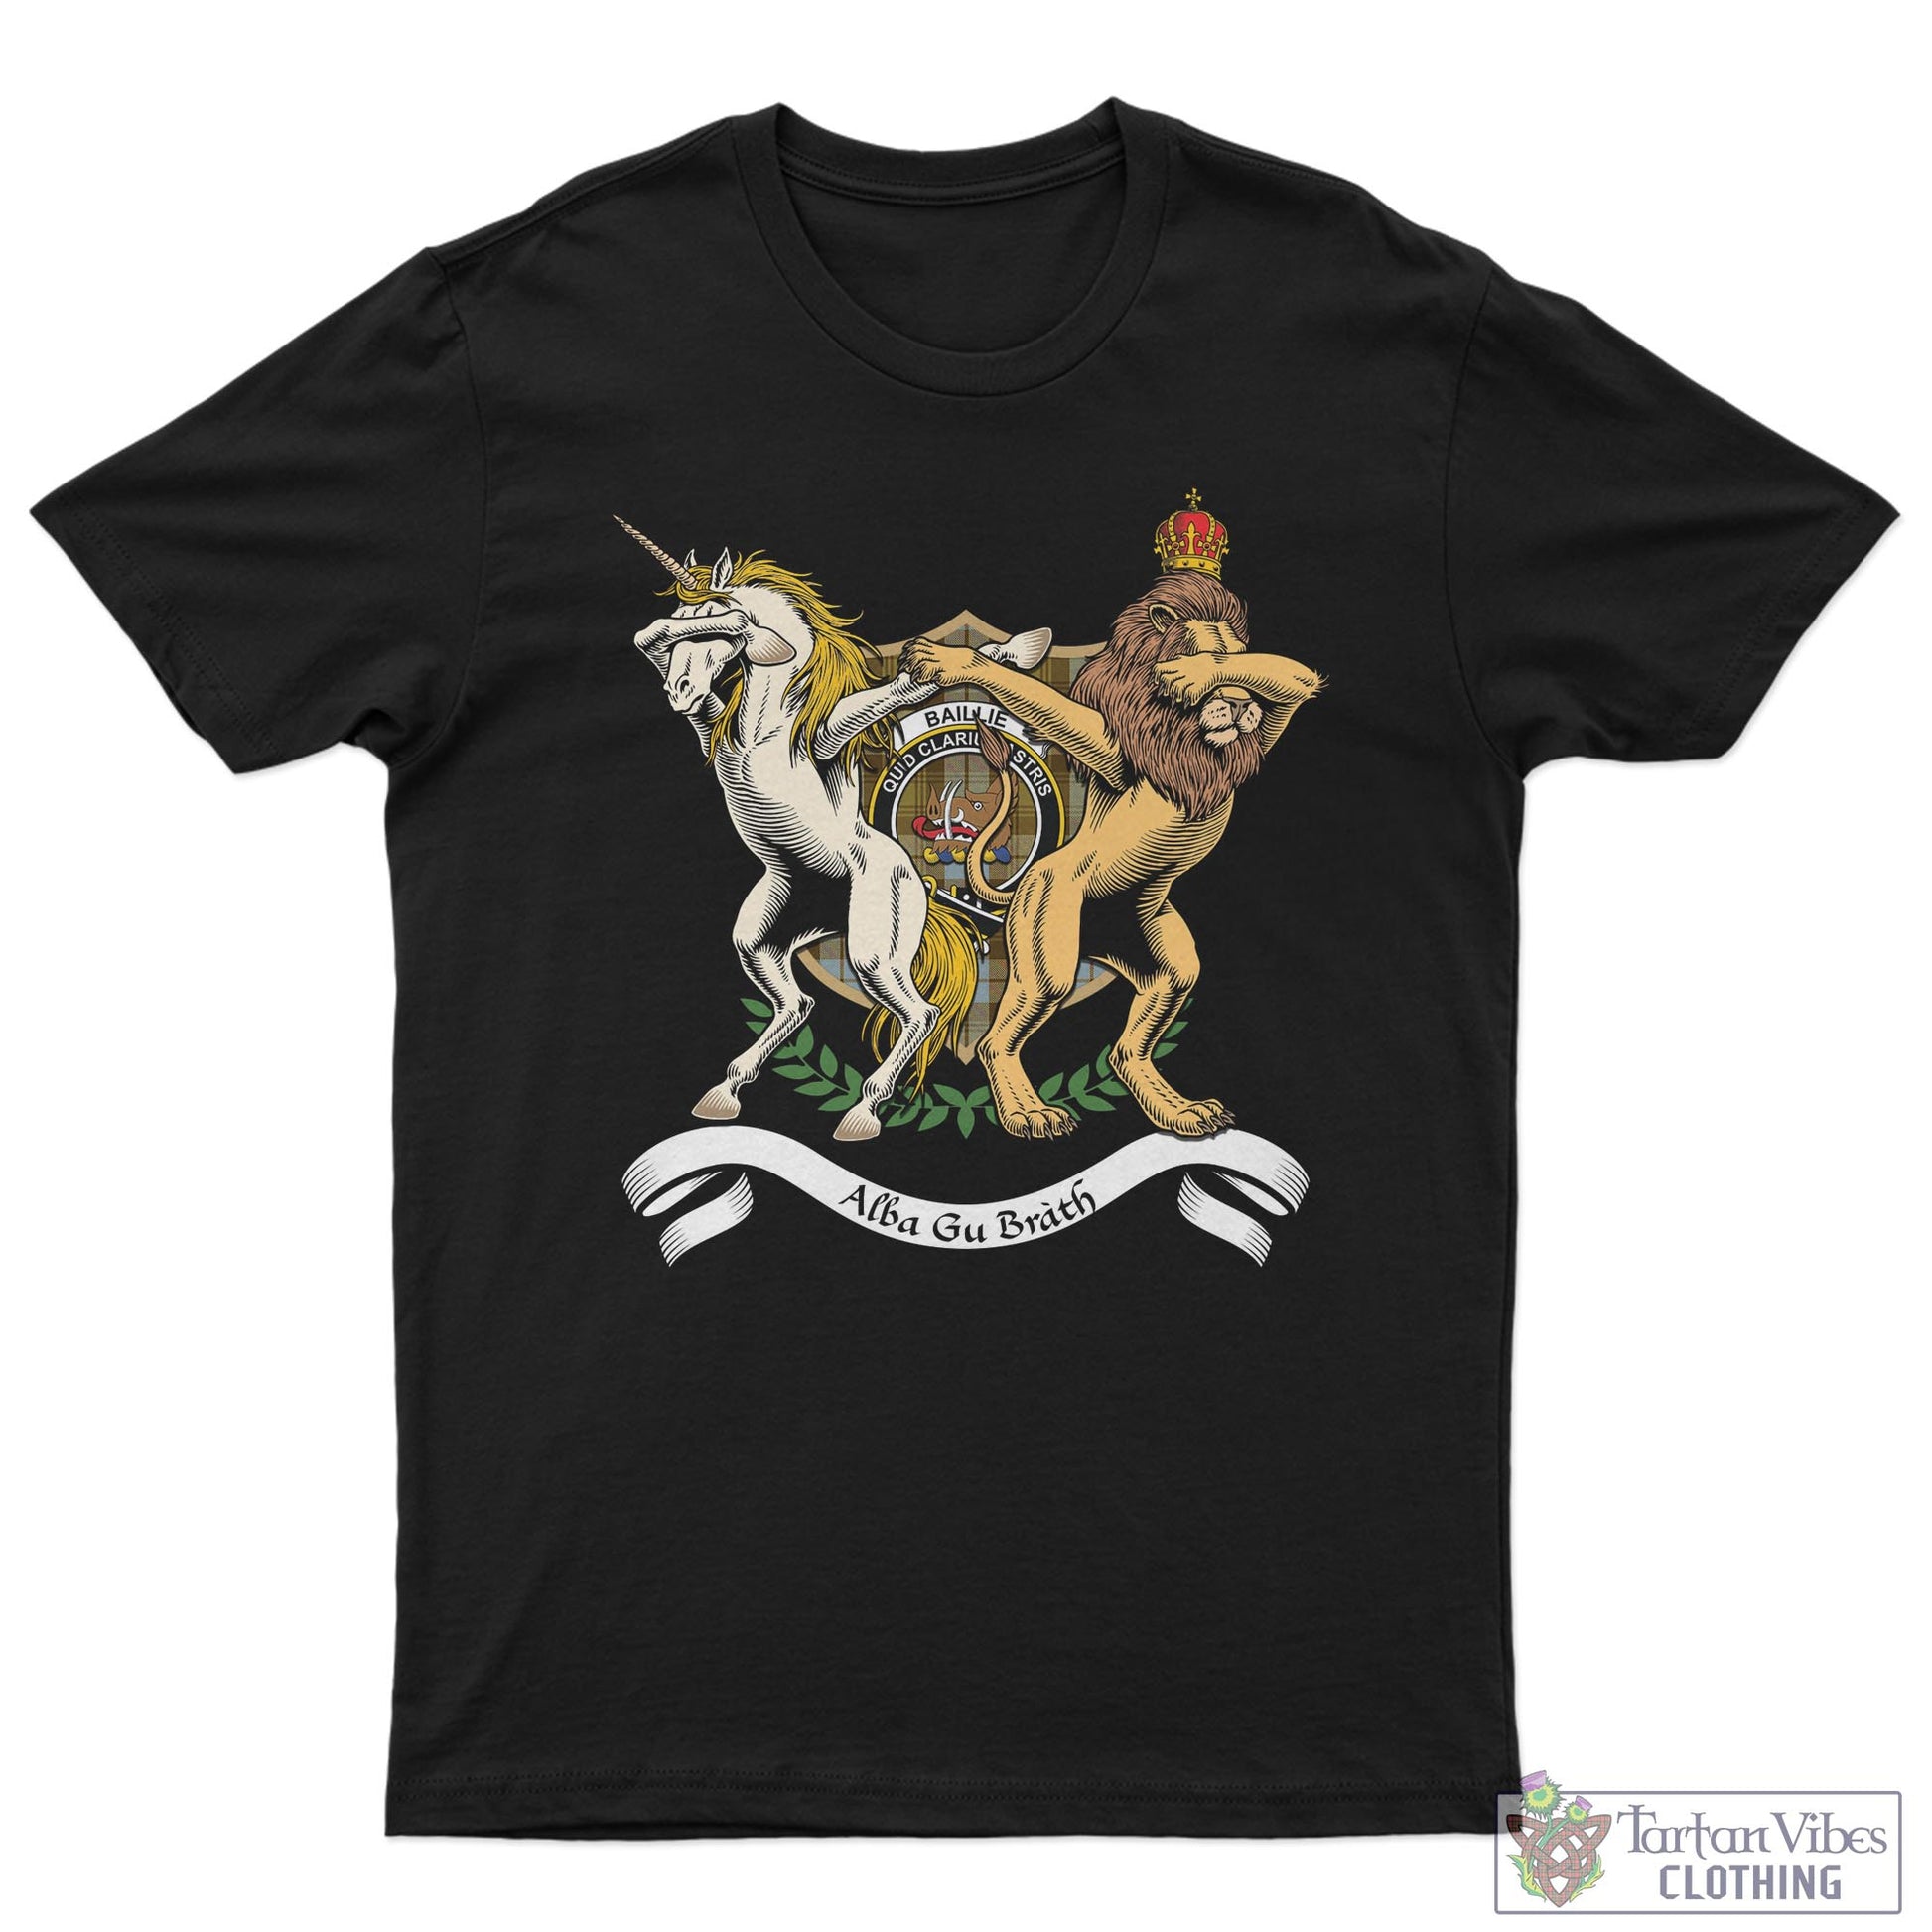 Tartan Vibes Clothing Baillie Dress Family Crest Cotton Men's T-Shirt with Scotland Royal Coat Of Arm Funny Style